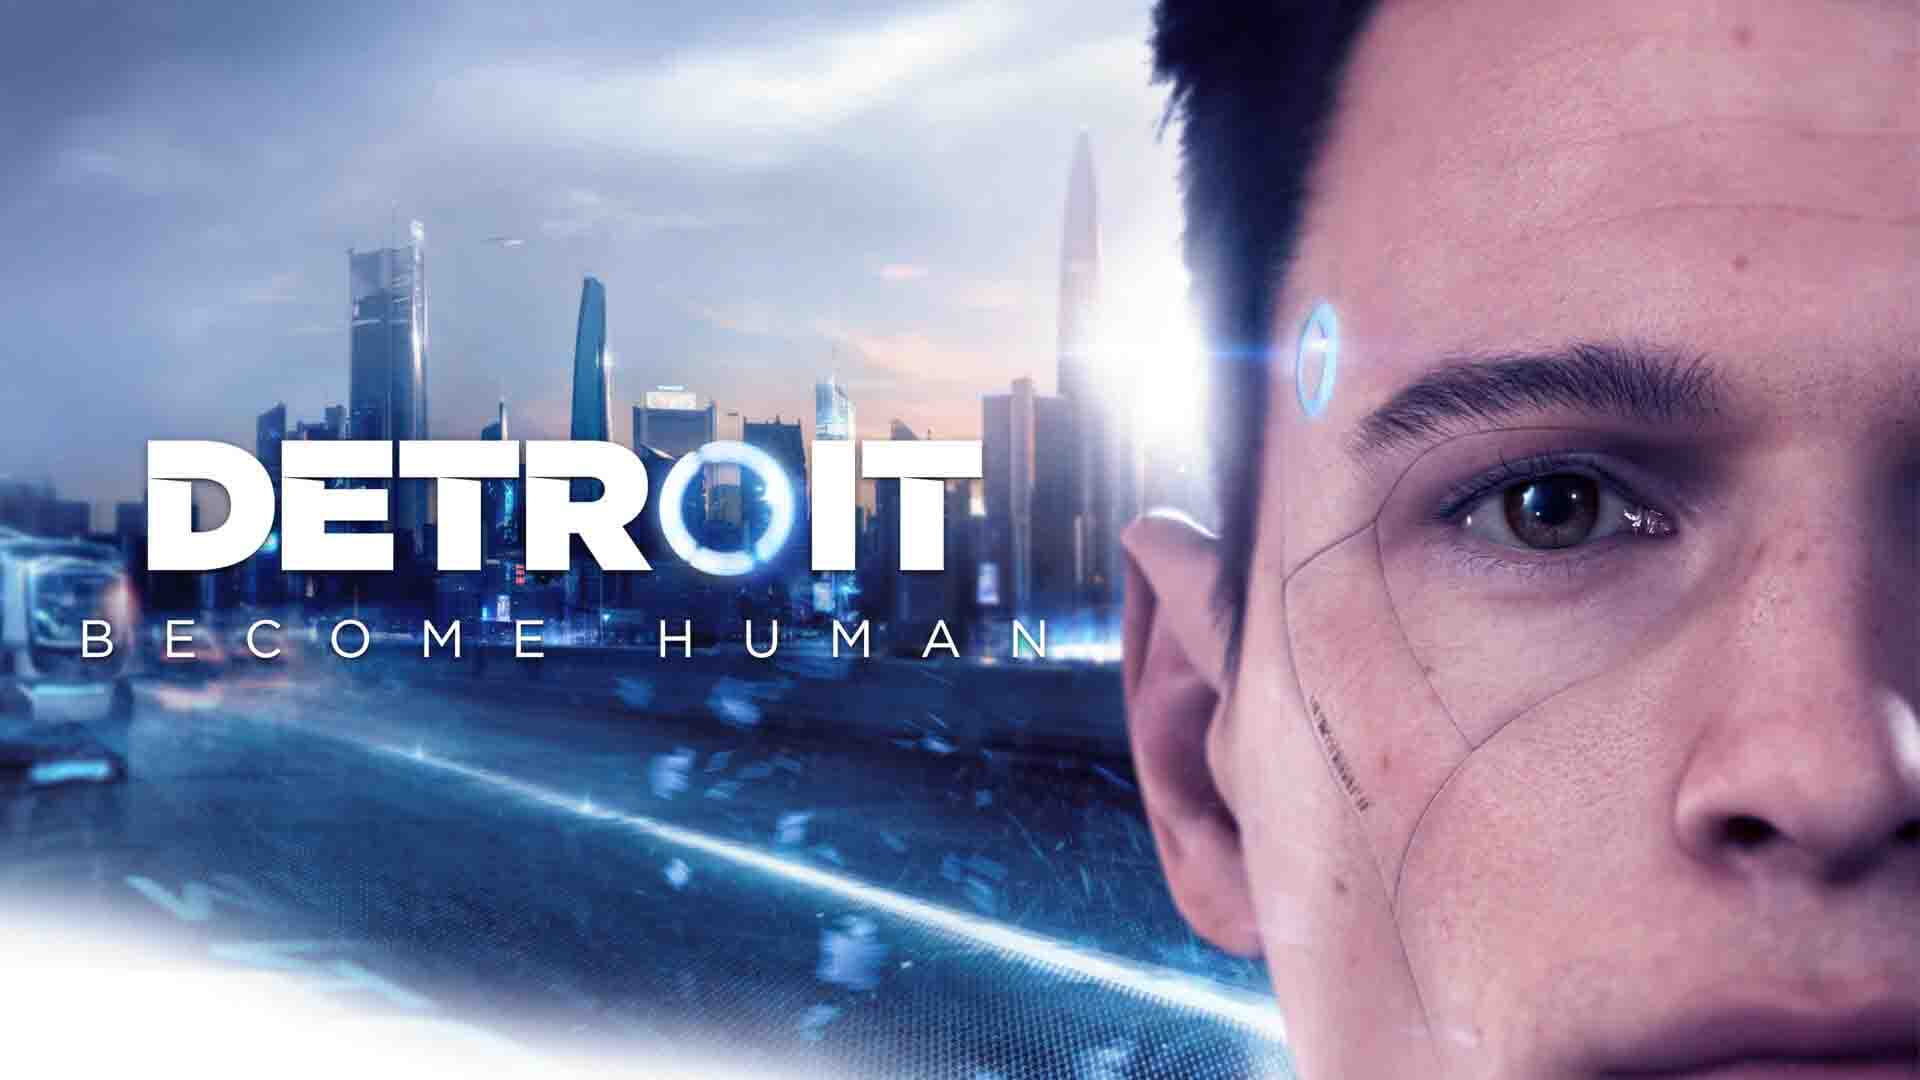 Detroit: Become Human System Requirements for PC Games minimum, recommended specifications for Windows, CPU, OS, Processor, RAM Memory, Storage, and GPU.